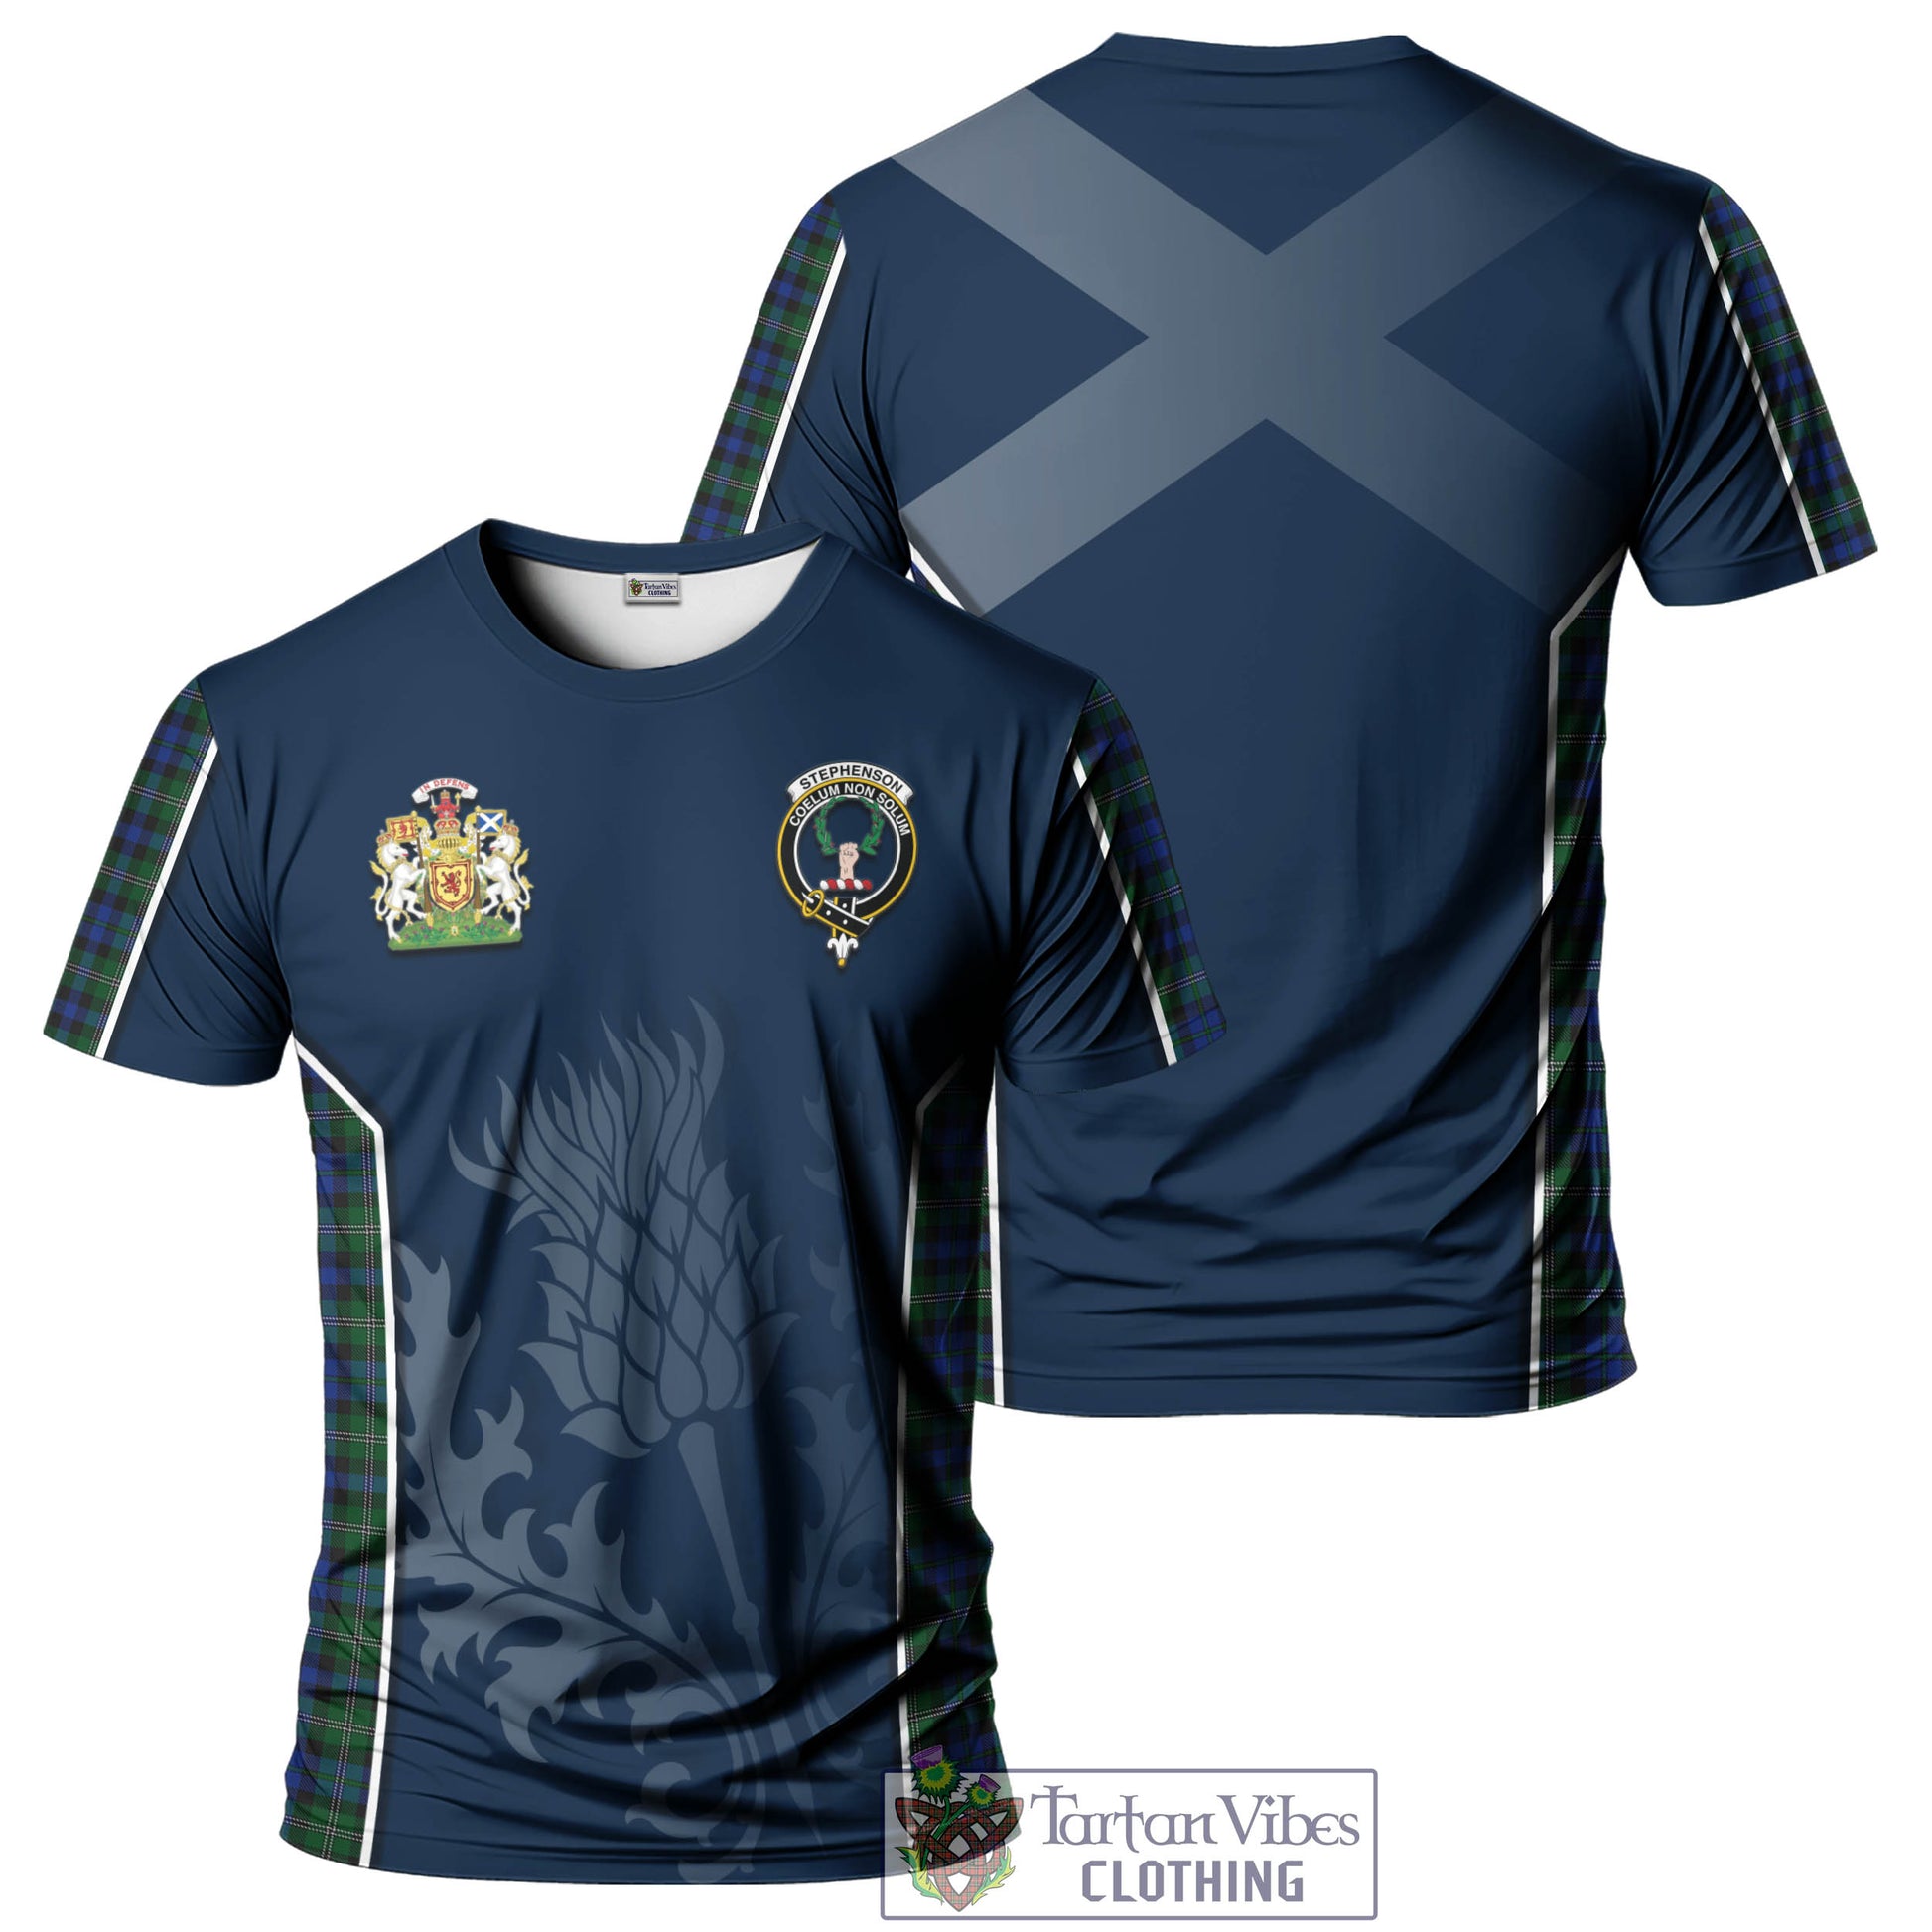 Tartan Vibes Clothing Stephenson Hunting Tartan T-Shirt with Family Crest and Scottish Thistle Vibes Sport Style